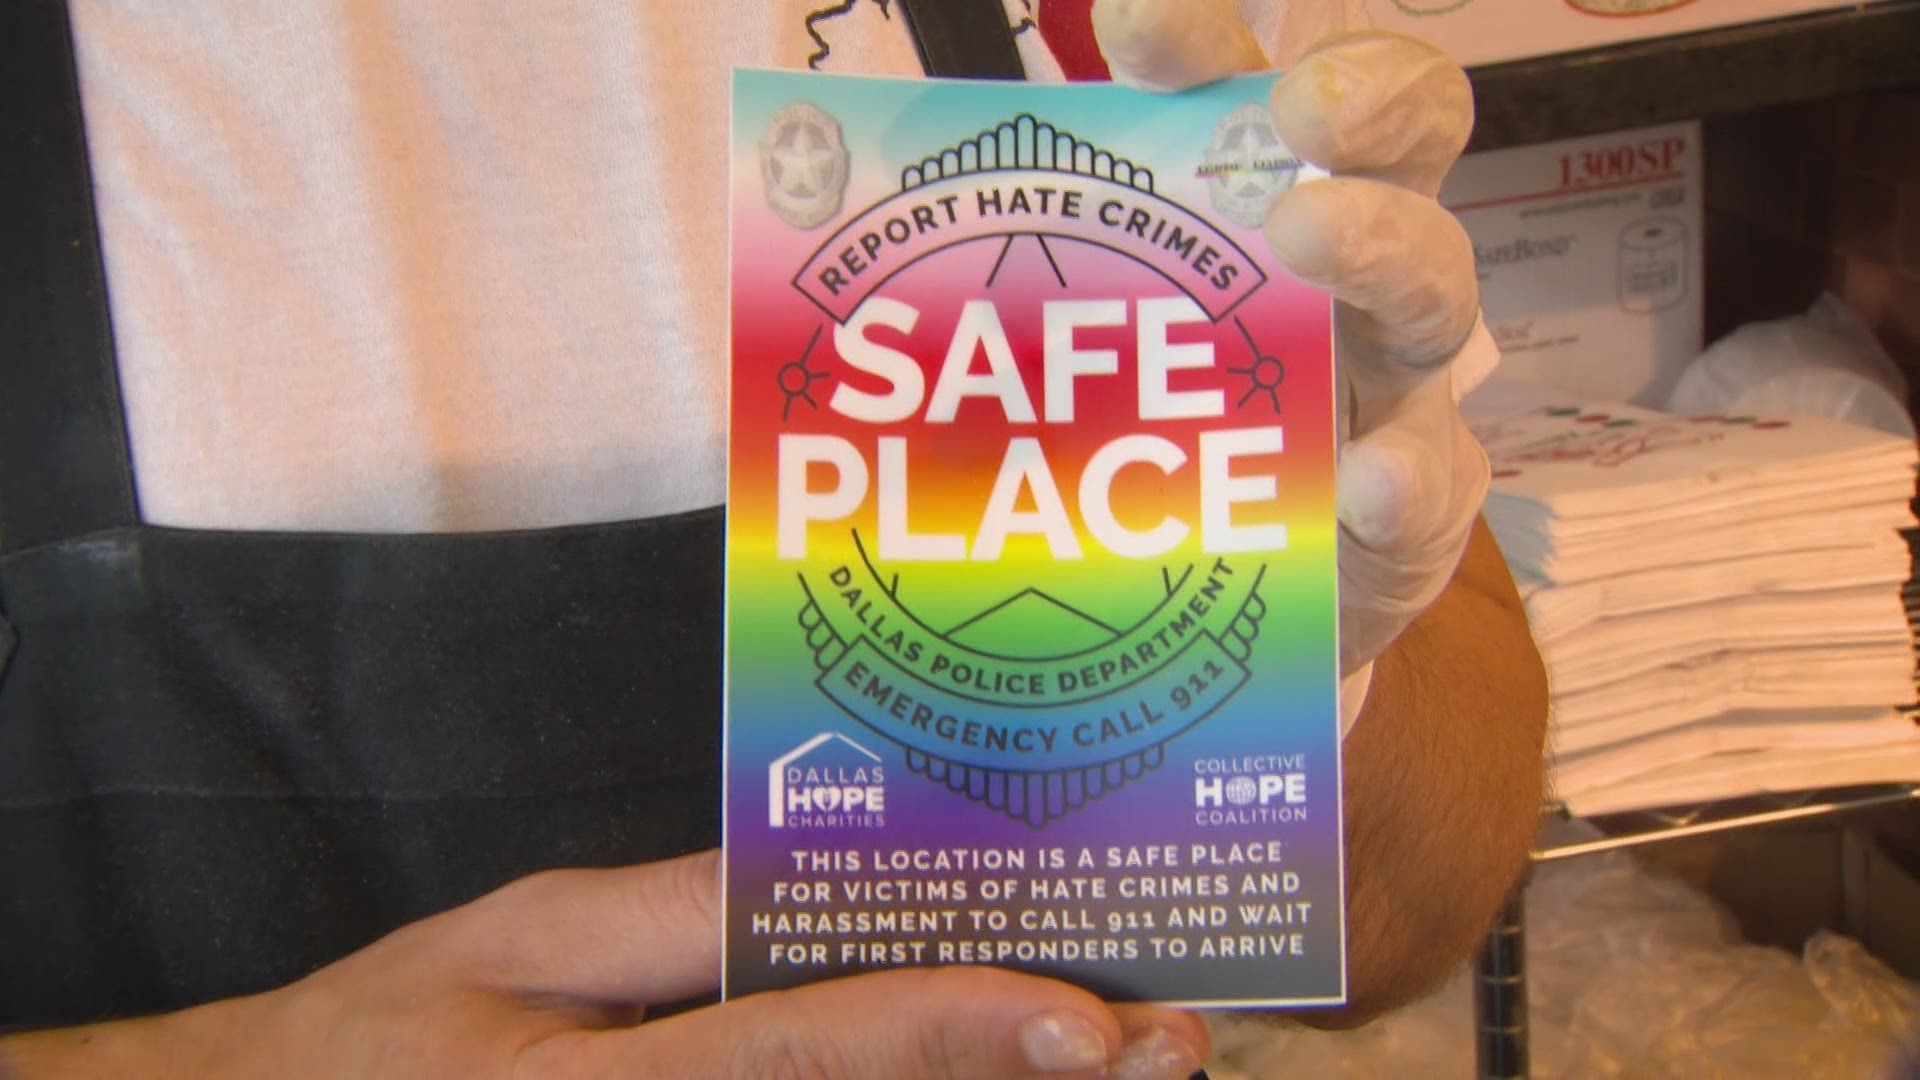 The Dallas Police Department and many business, organizations and more are coming together for the launch of the ‘Safe Place’ program.